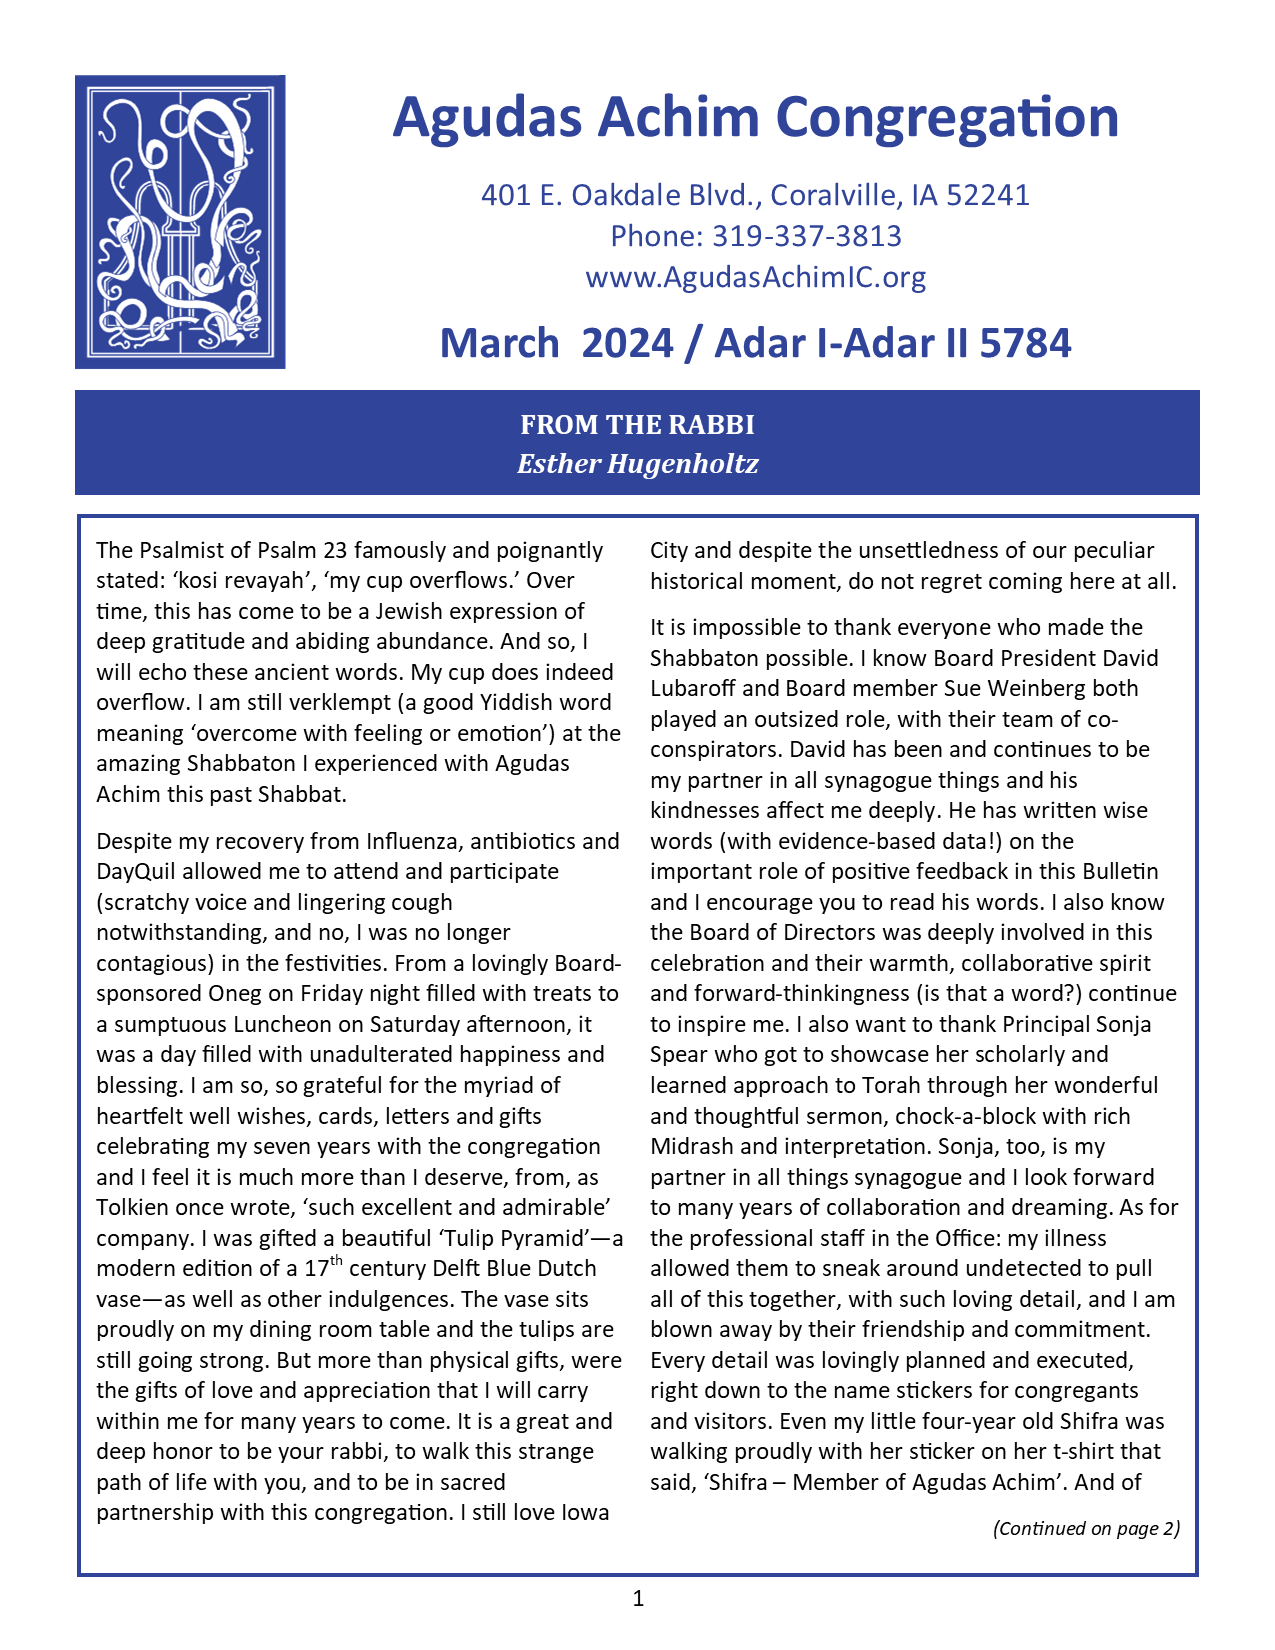 March 2024 Bulletin Cover